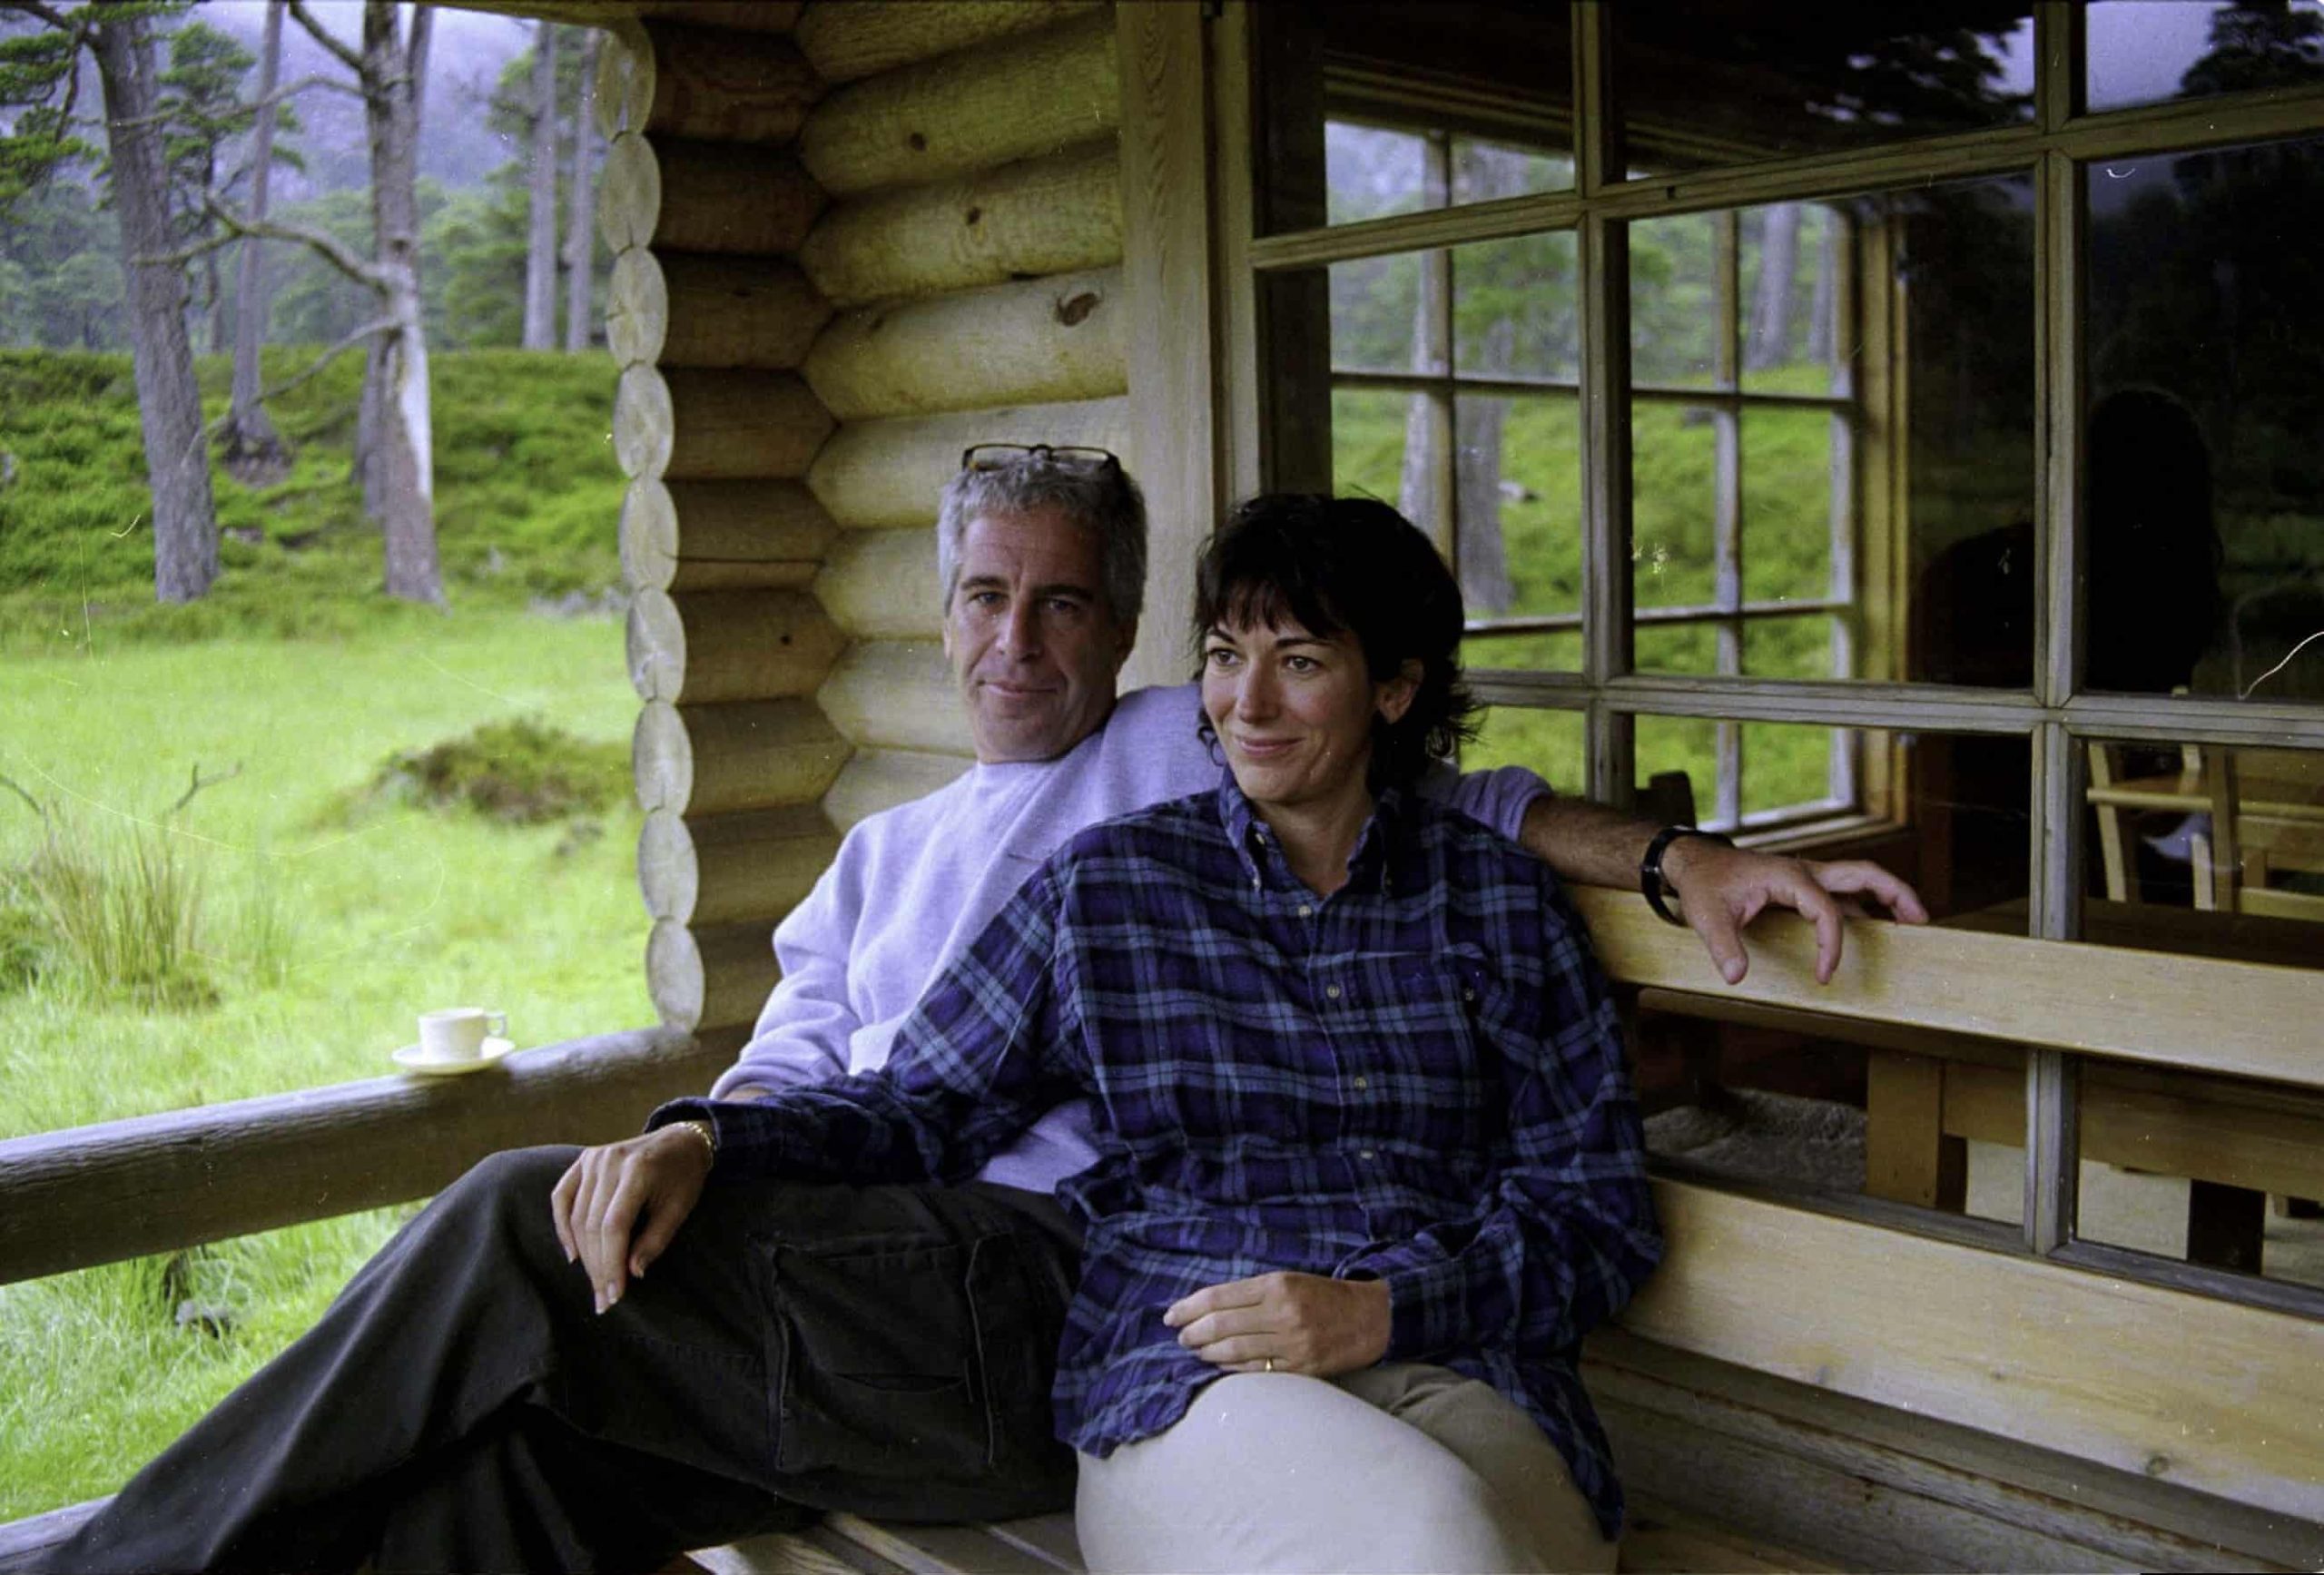 Images of Ghislaine Maxwell & Jeffrey Epstein released